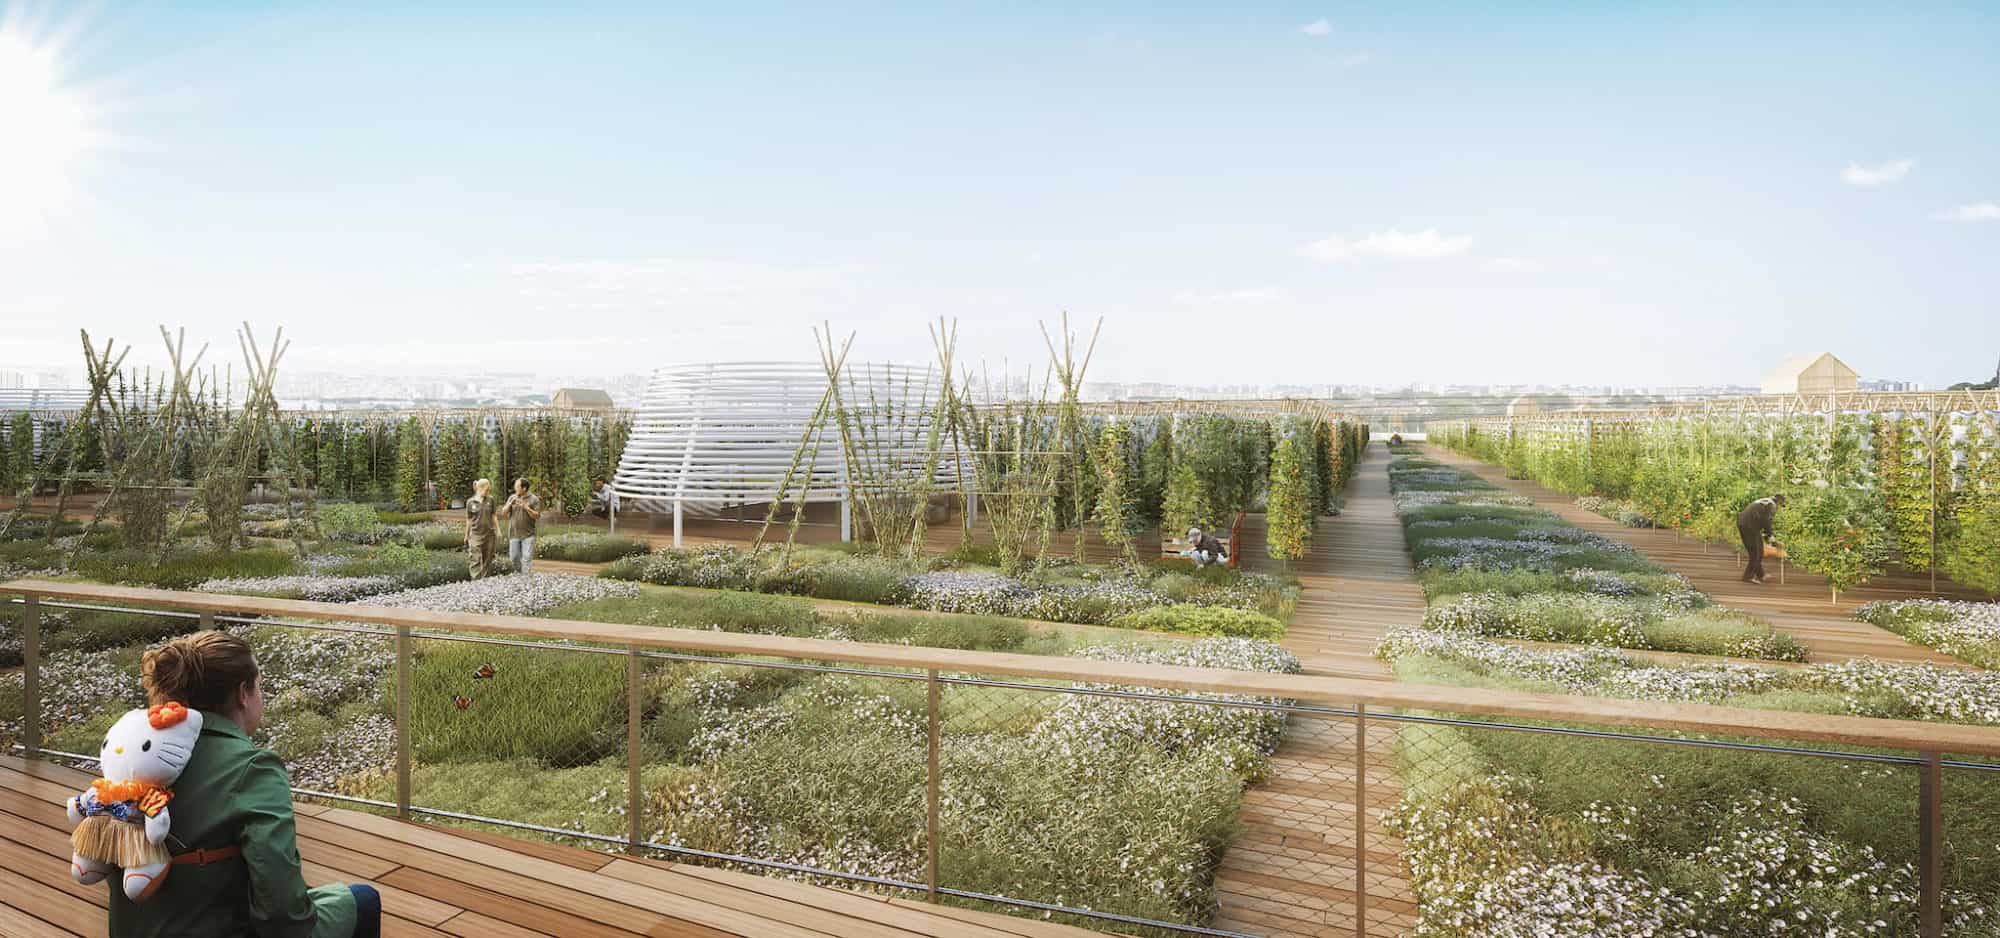 Blue skies and sunshine over Agripolis, Europe's largest rooftop green space located at the Porte de Versailles in Paris. 